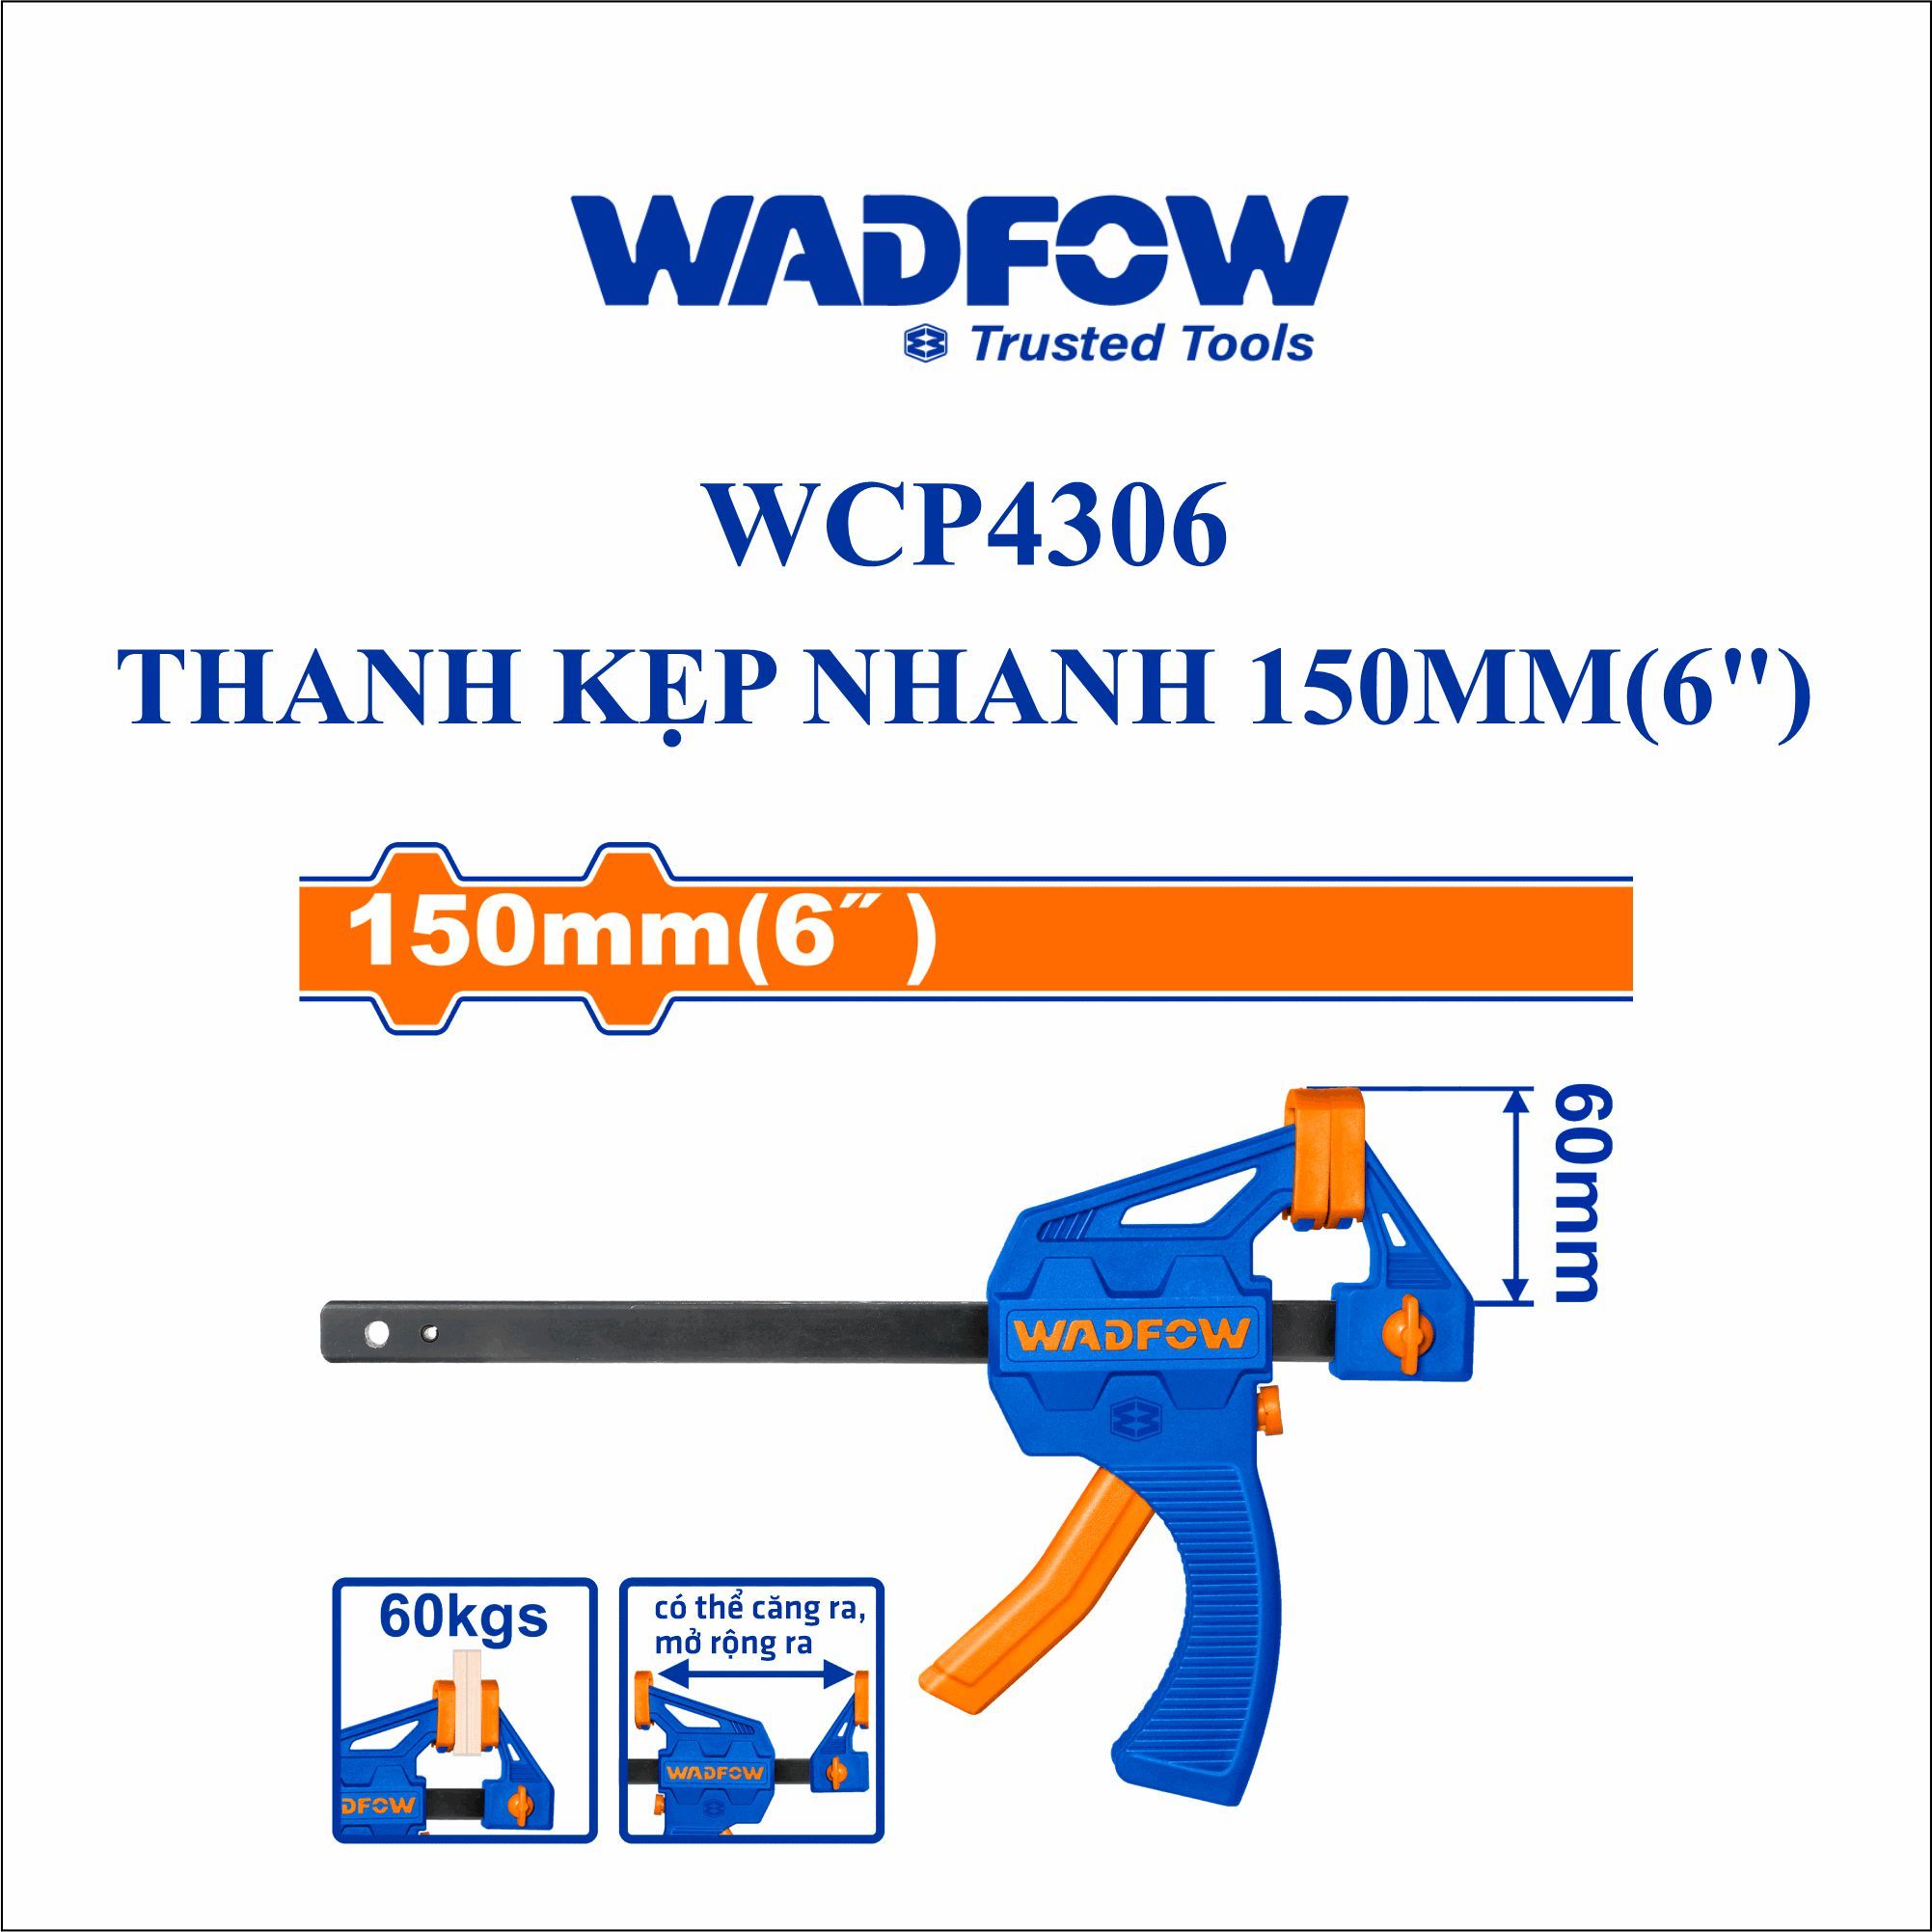  Thanh kẹp nhanh 150mm(6 Inch) WADFOW WCP4306 